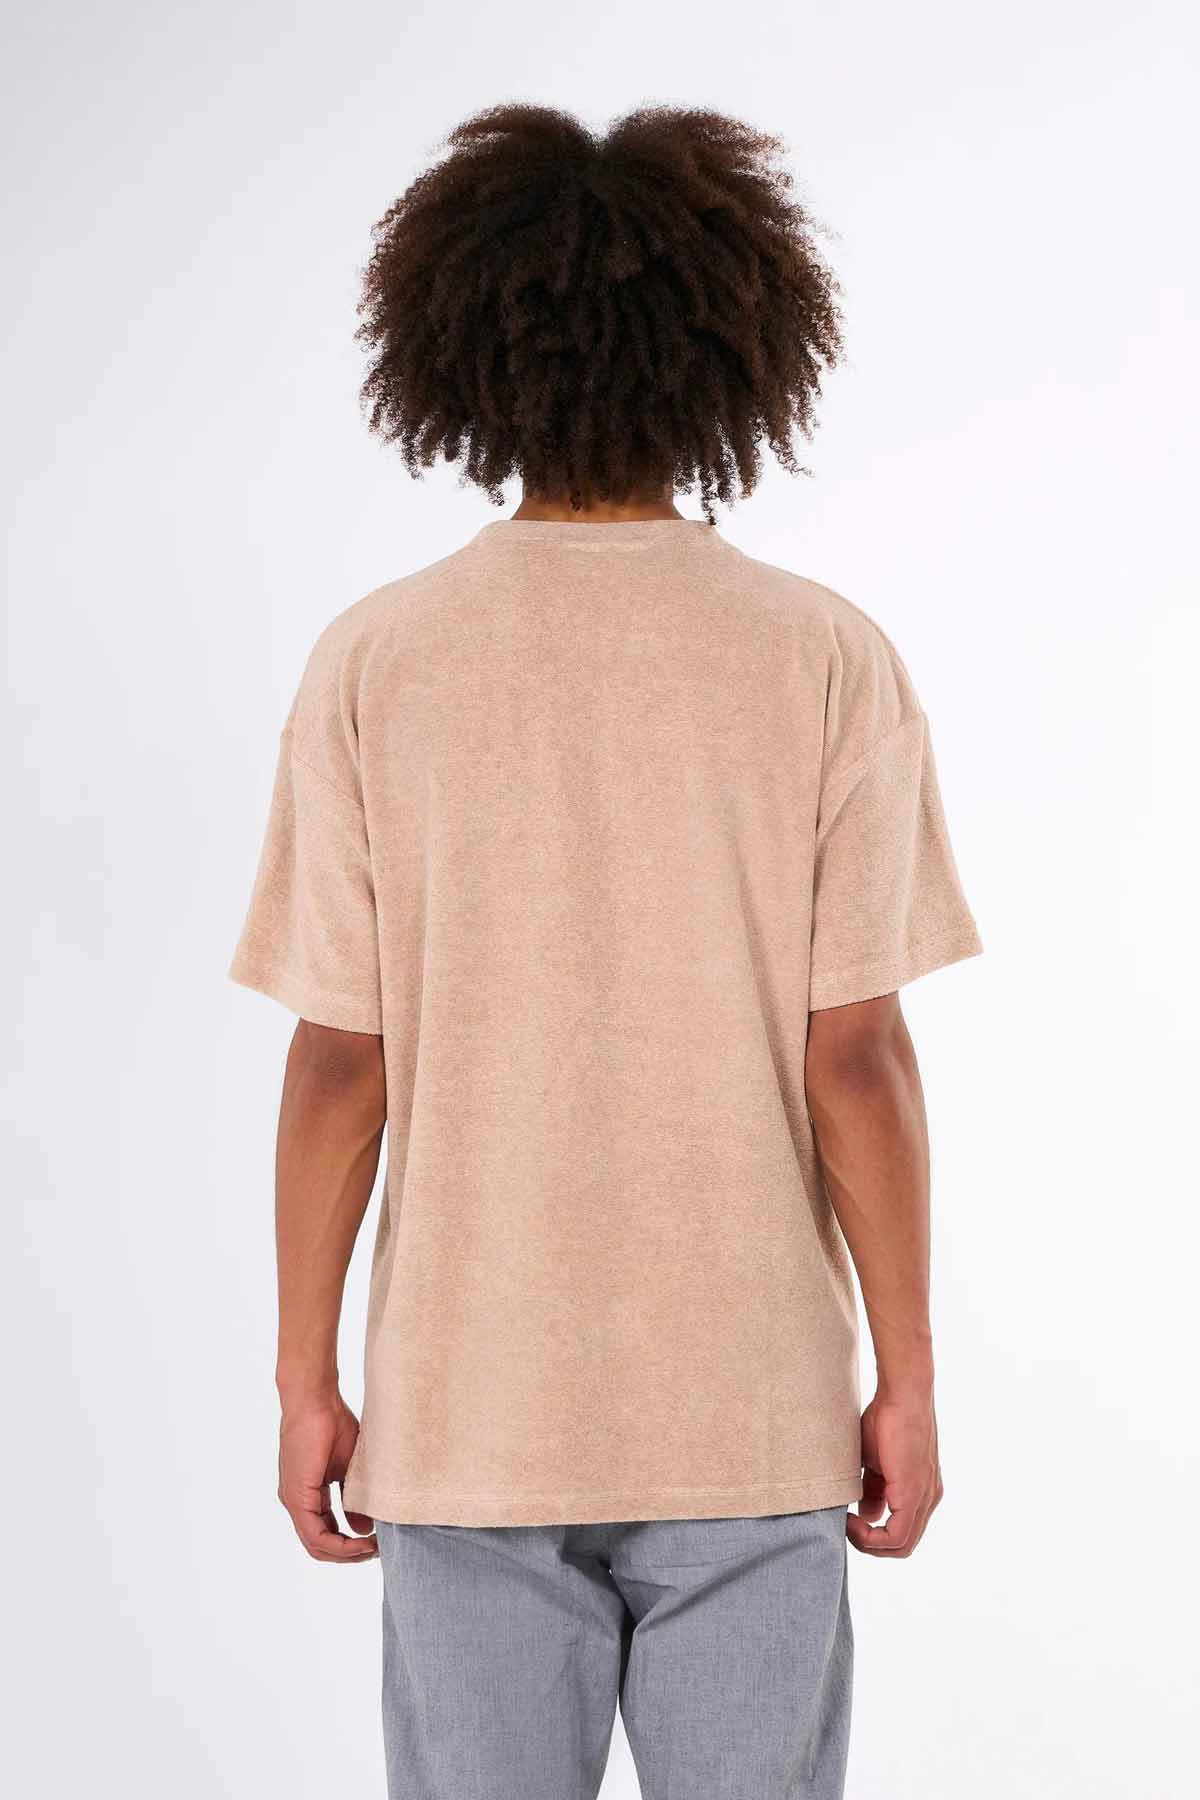 T-Shirt Terry loose - Knowledge Cotton Apparel